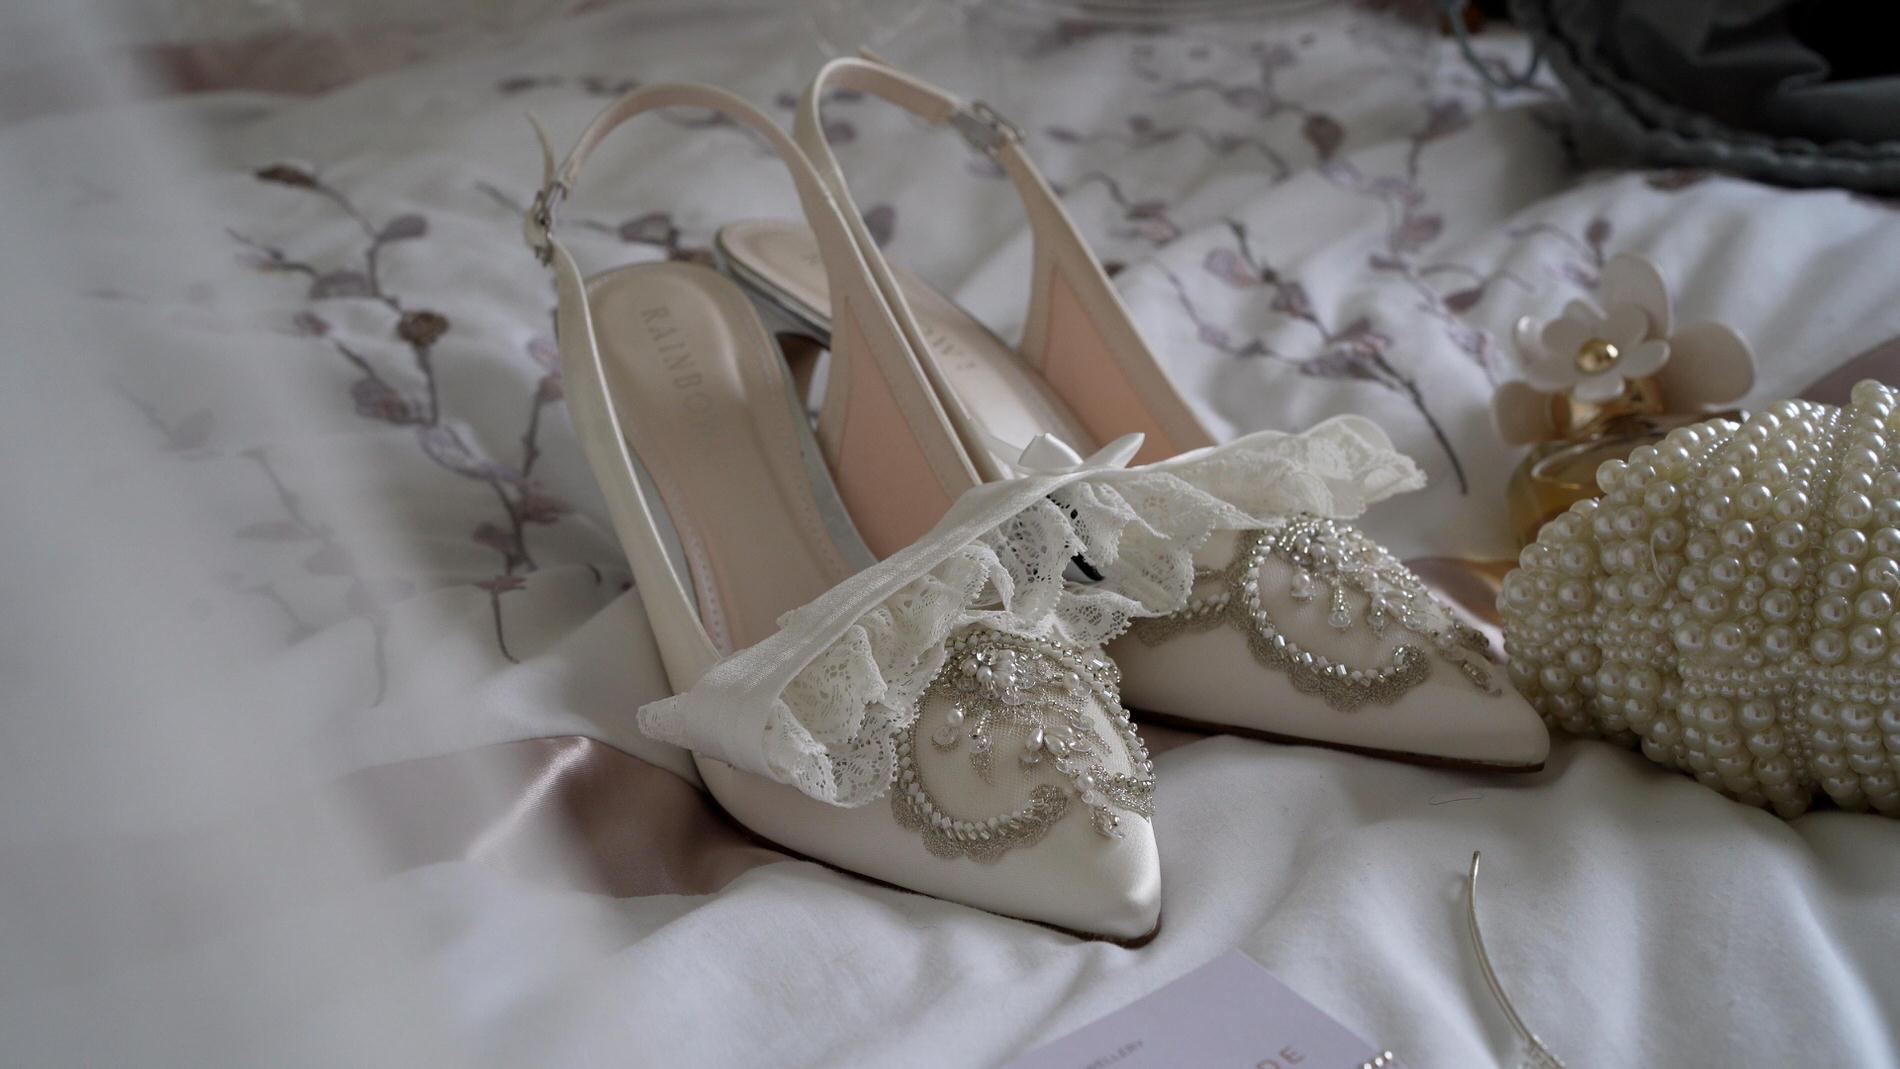 satin wedding shoes sit on a bed with a veil